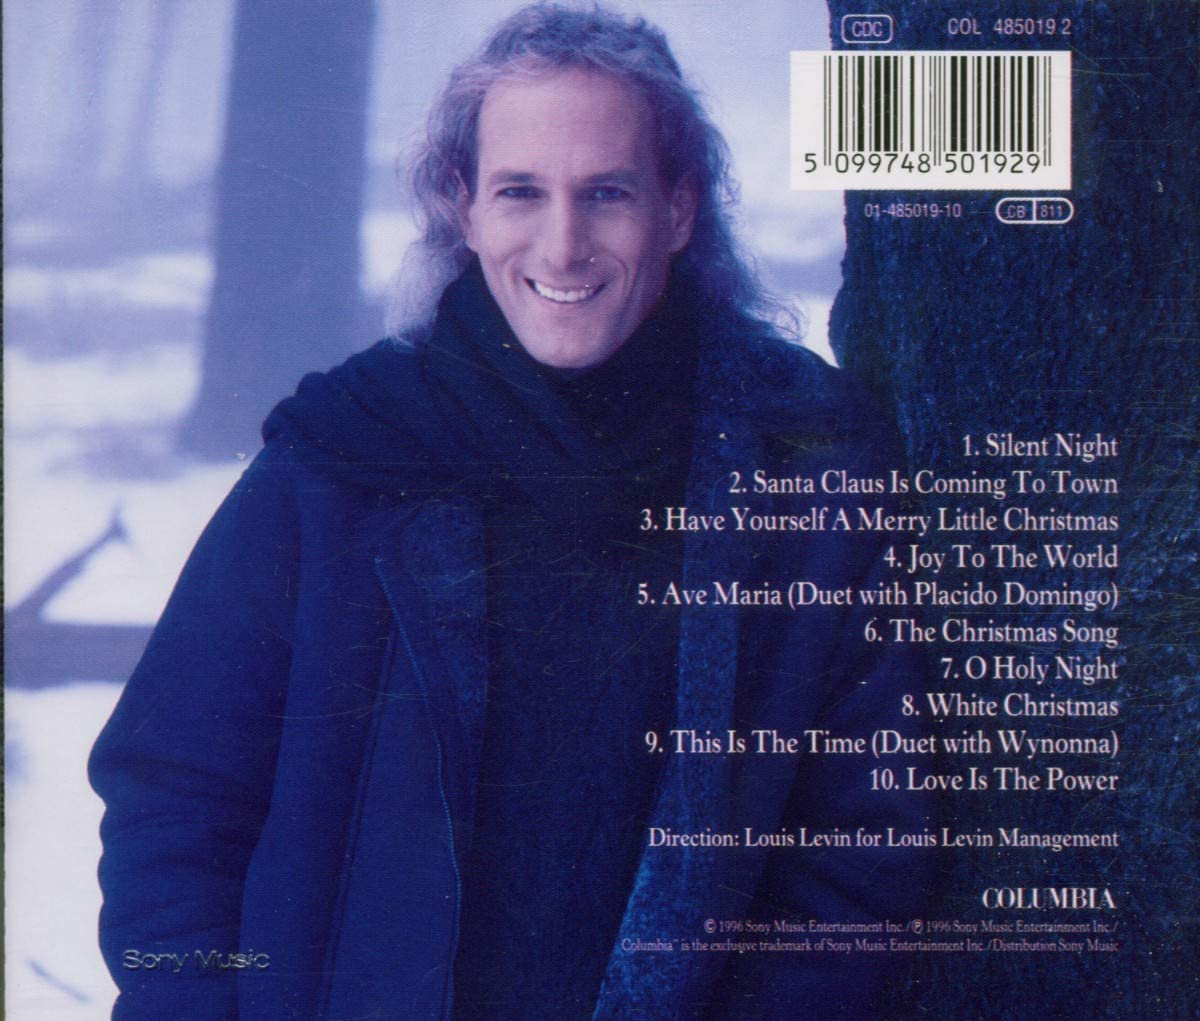 This Is The Time: The Christmas Album | Michael Bolton